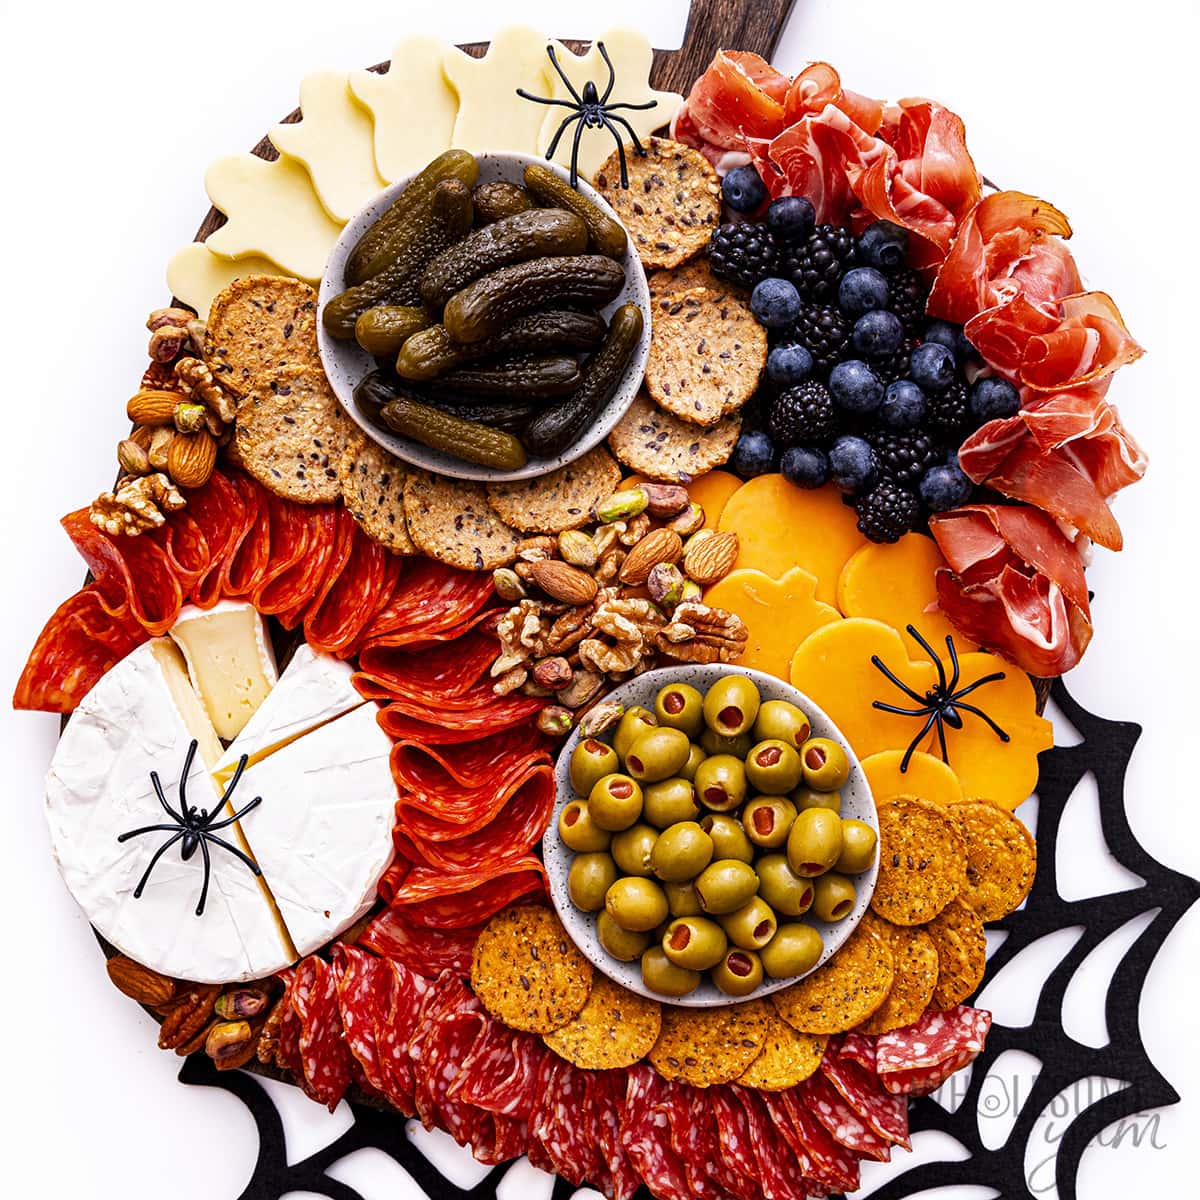 Halloween Charcuterie Board comes fully assembled.